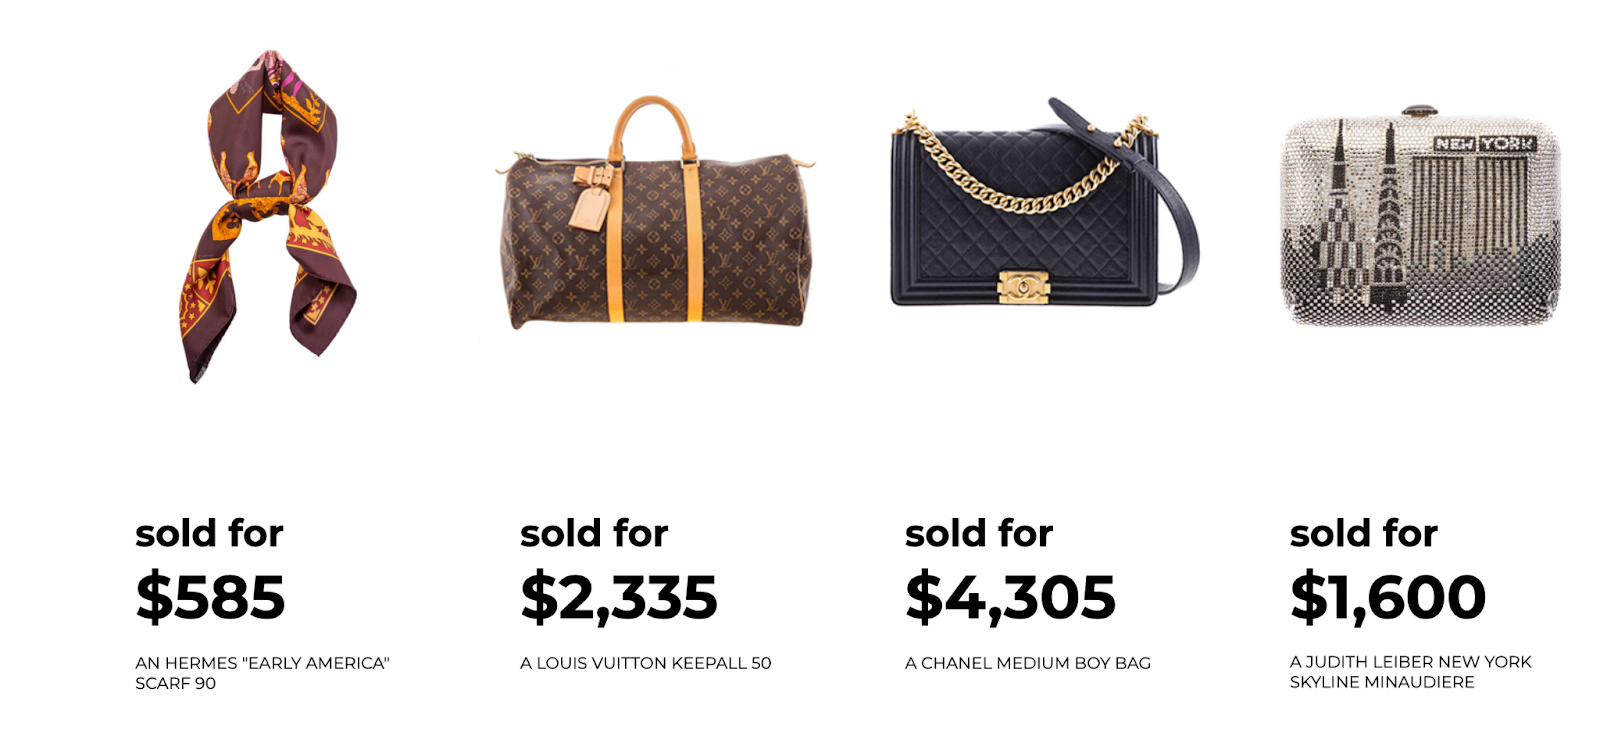 Top Designer Bags To Resell Now | The Handbag Clinic